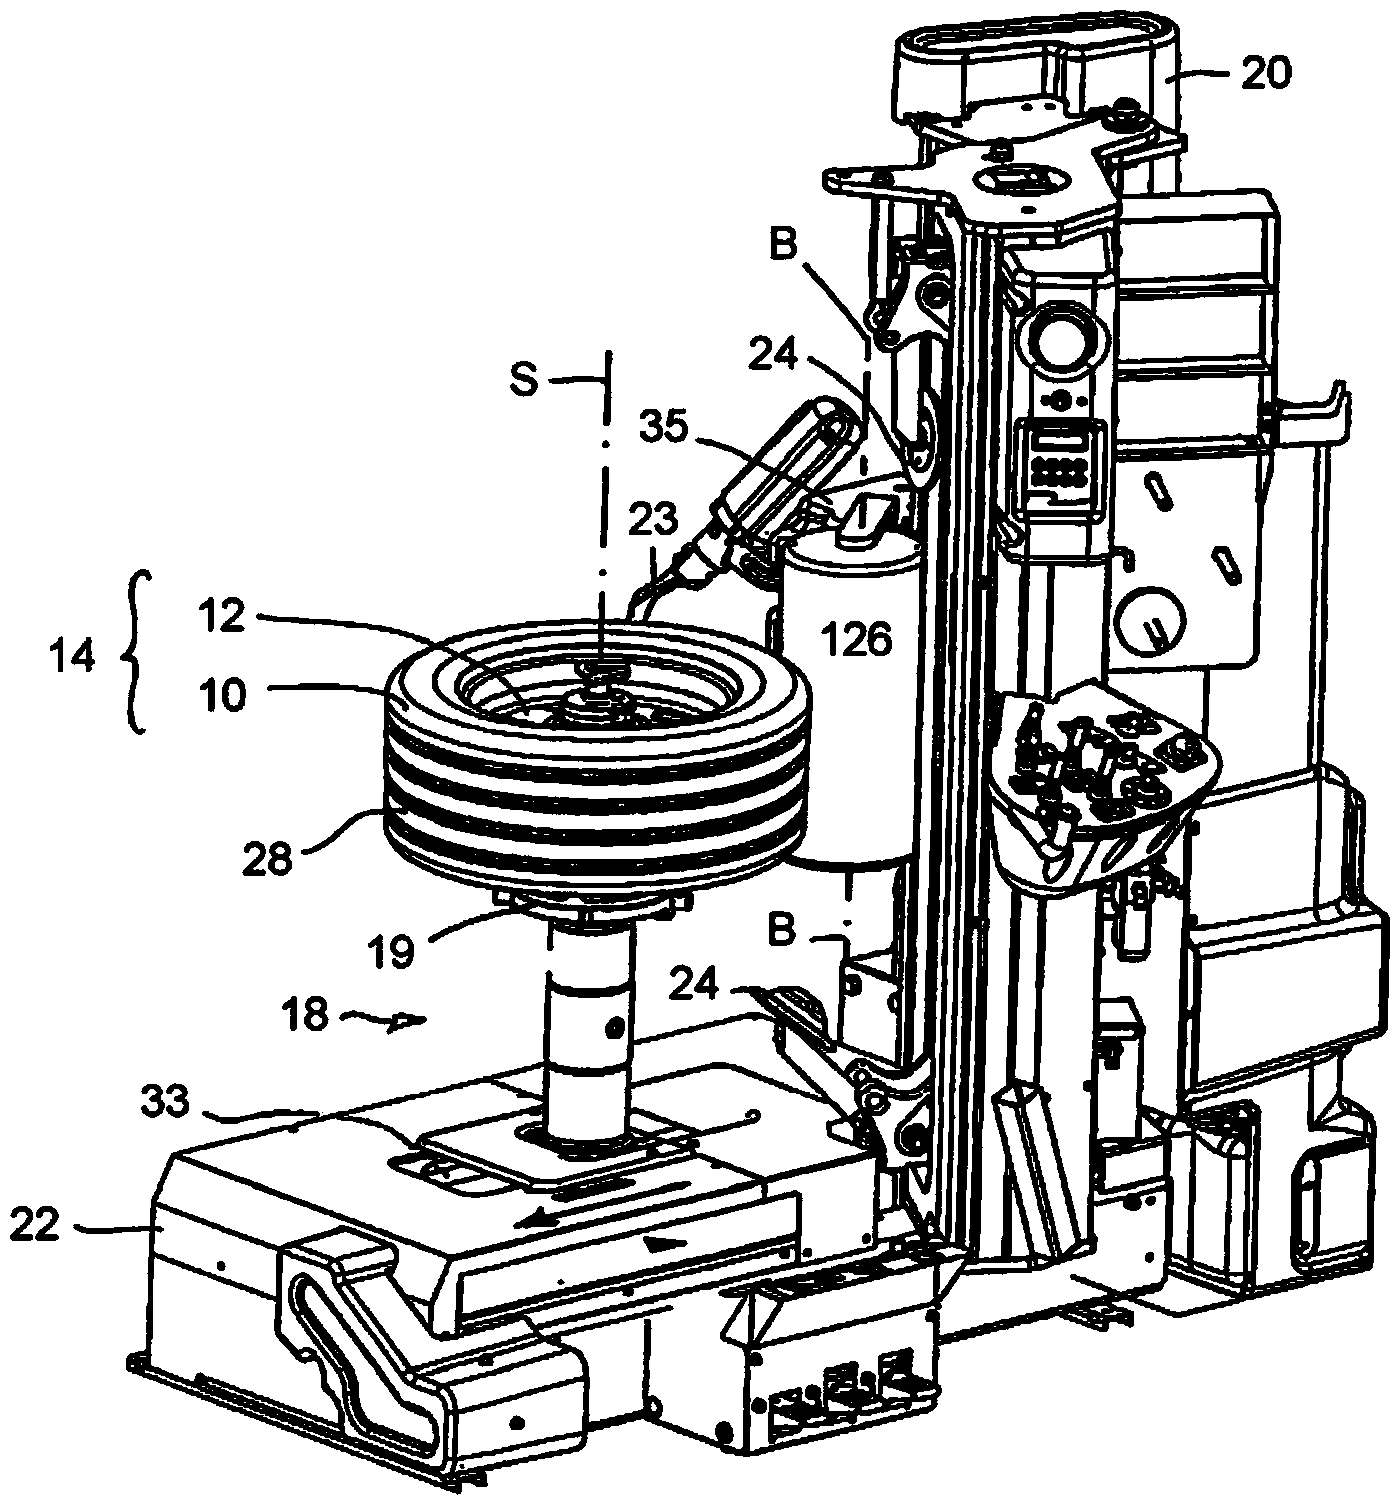 Automotive shop service apparatus having means for determining the rolling resistance coefficient of a tyre